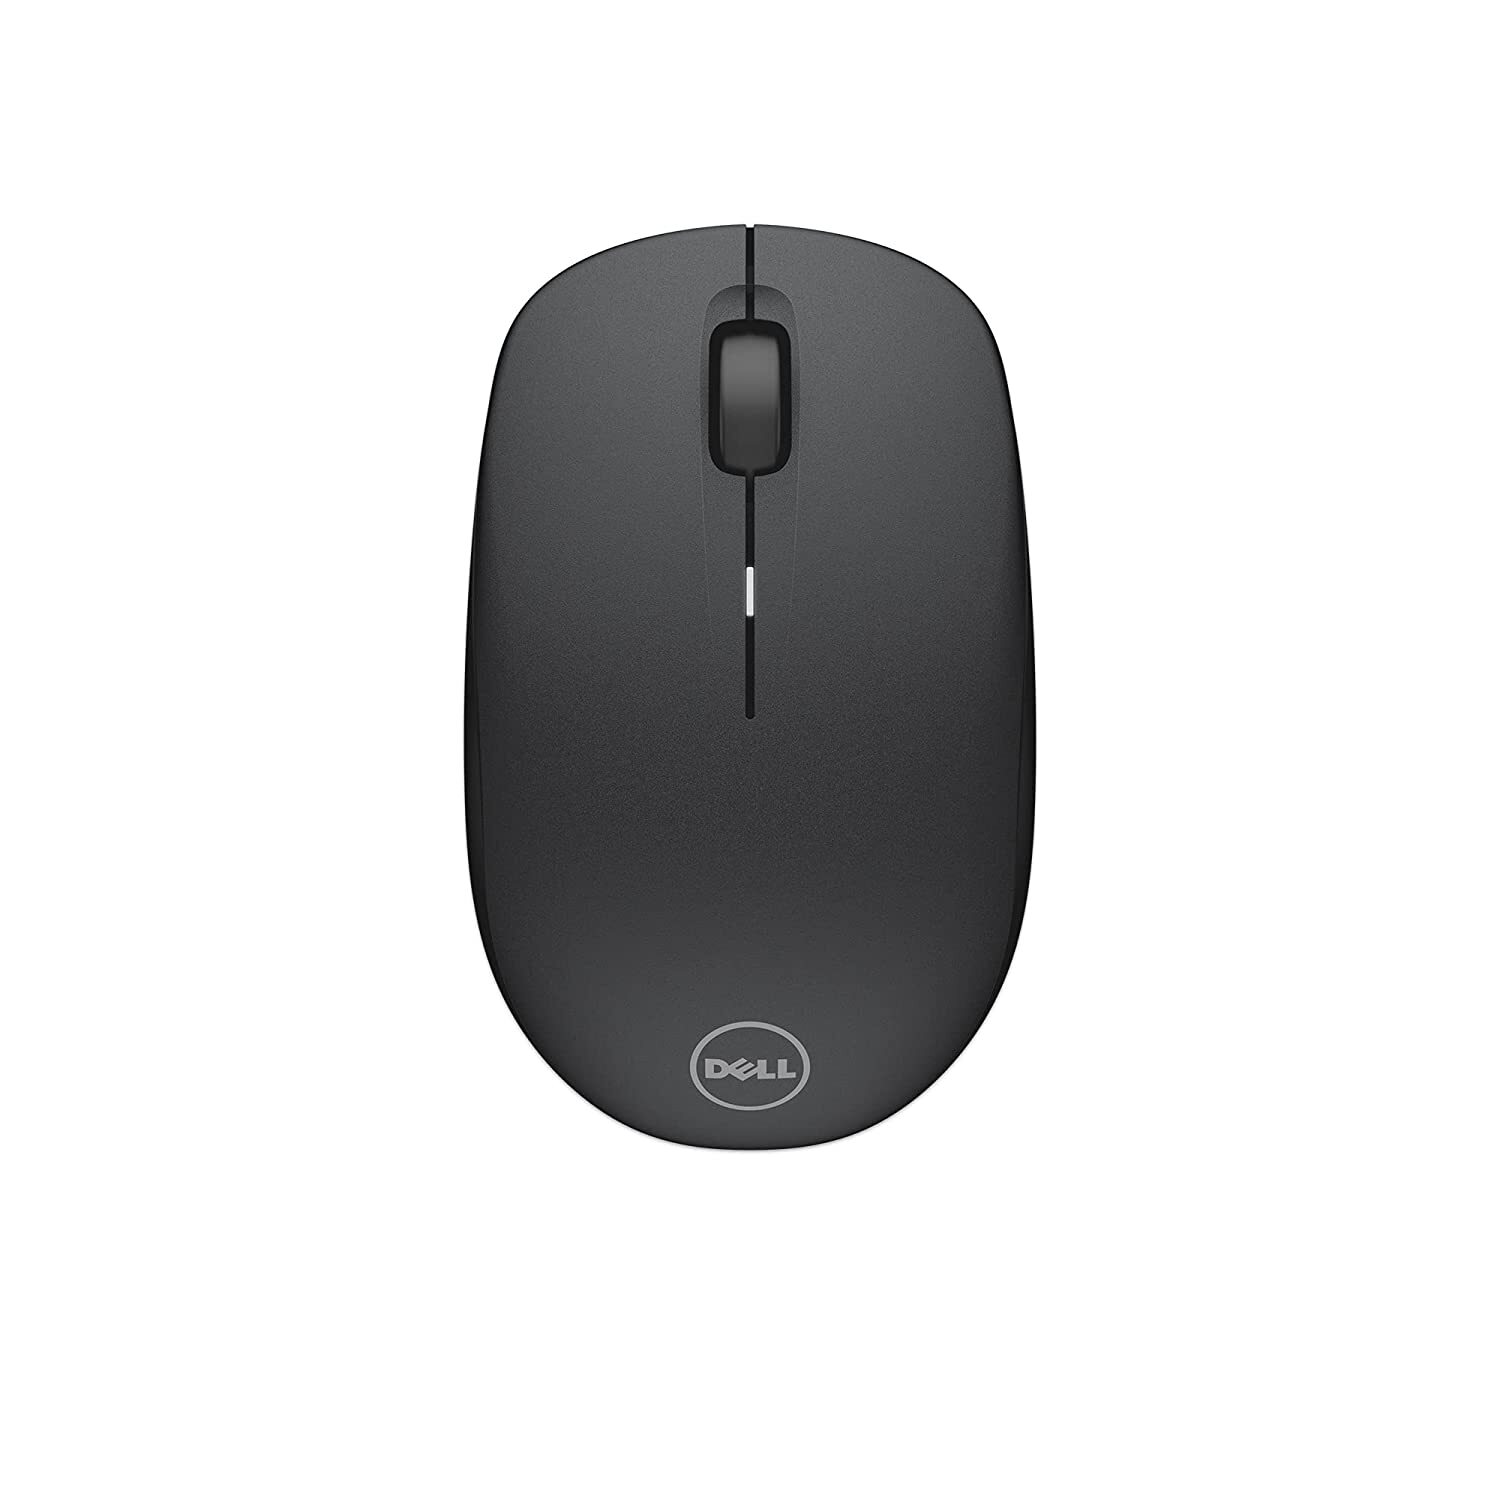 Dell Wm126-Black Wireless Mouse | Compact & Travel Friendly Design | Ambidextrous |Universal Pairing Technology: Connect Up To 6 Compatible Devices With One Receiver